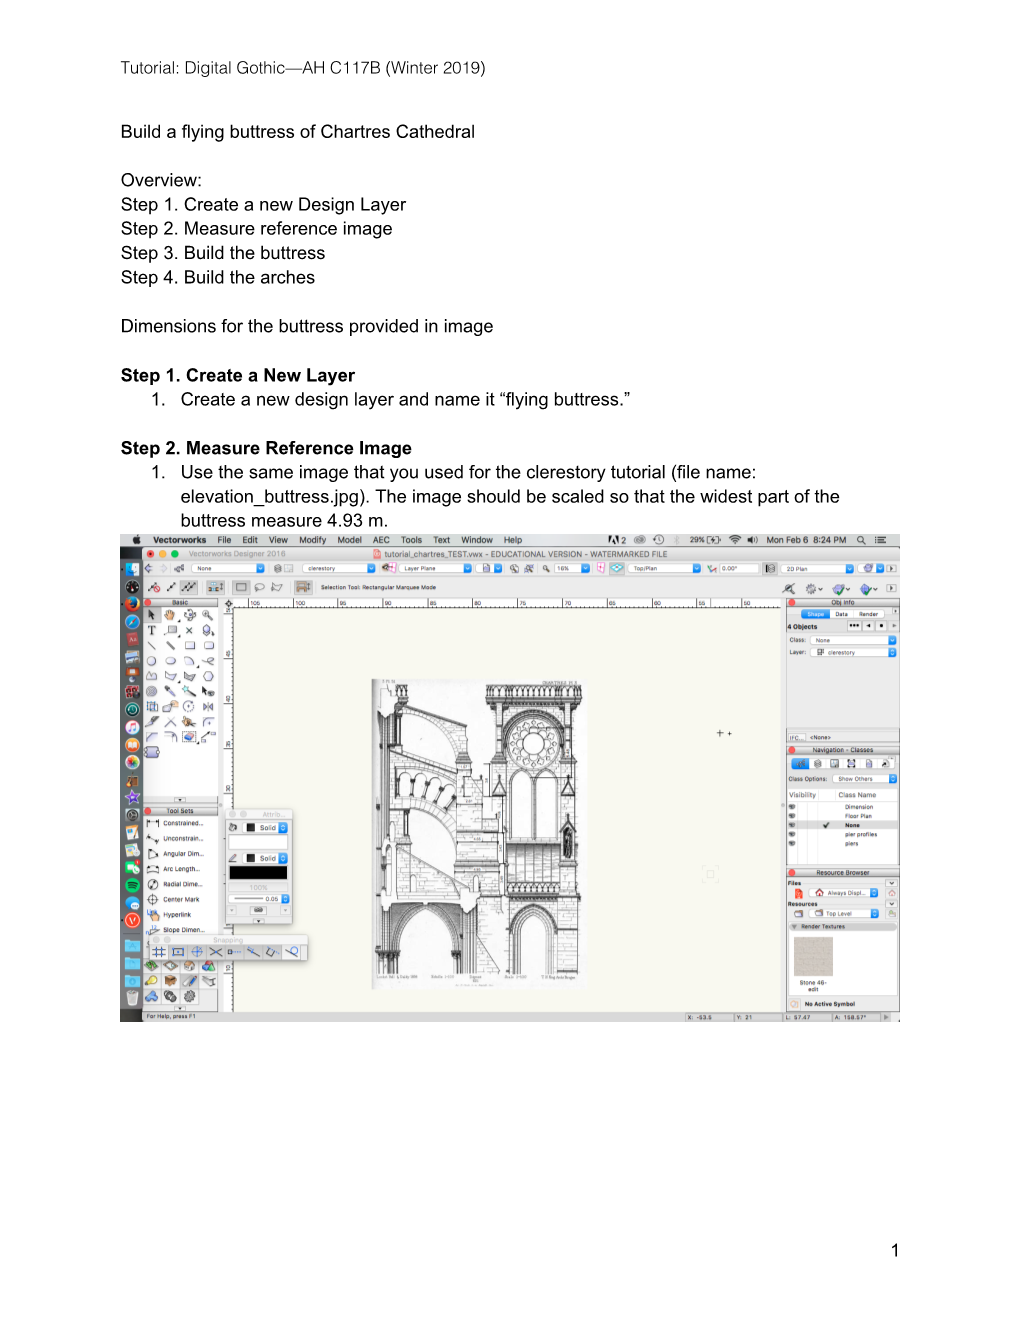 1 Build a Flying Buttress of Chartres Cathedral Overview: Step 1. Create a New Design Layer Step 2. Measure Reference Image